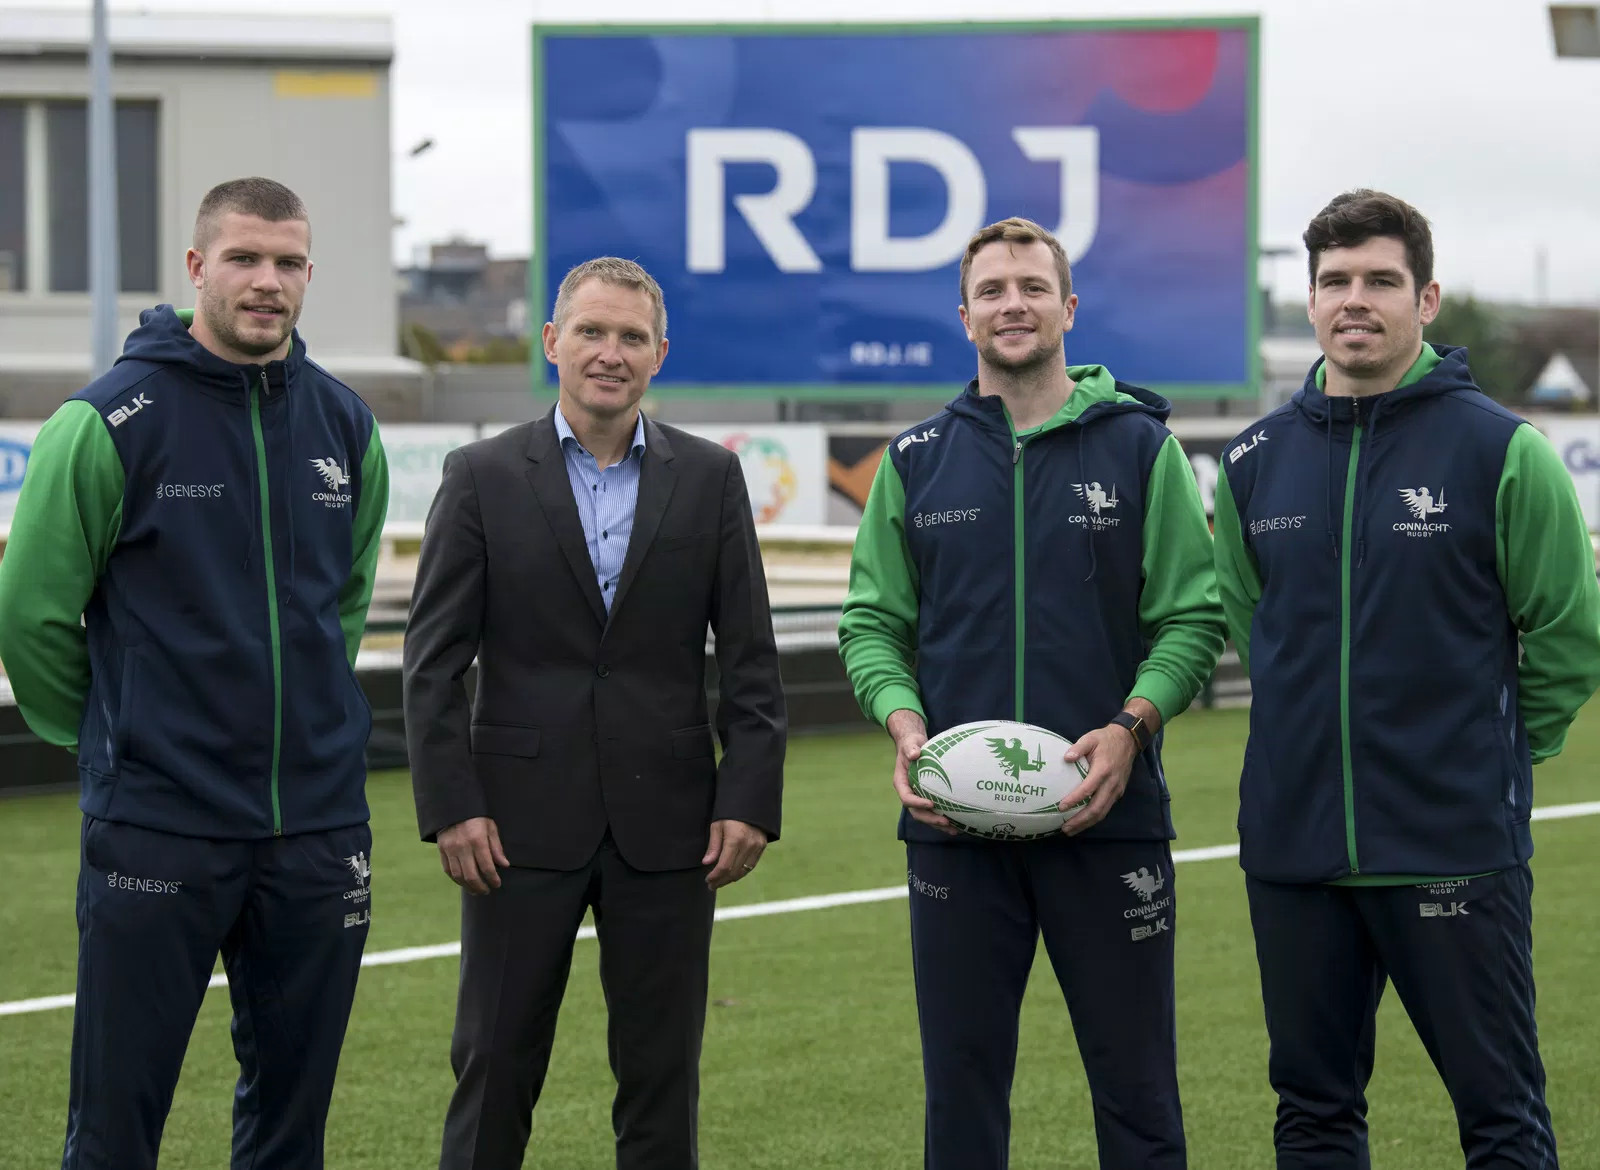 #InPictures: RDJ renews partnership with Connacht Rugby